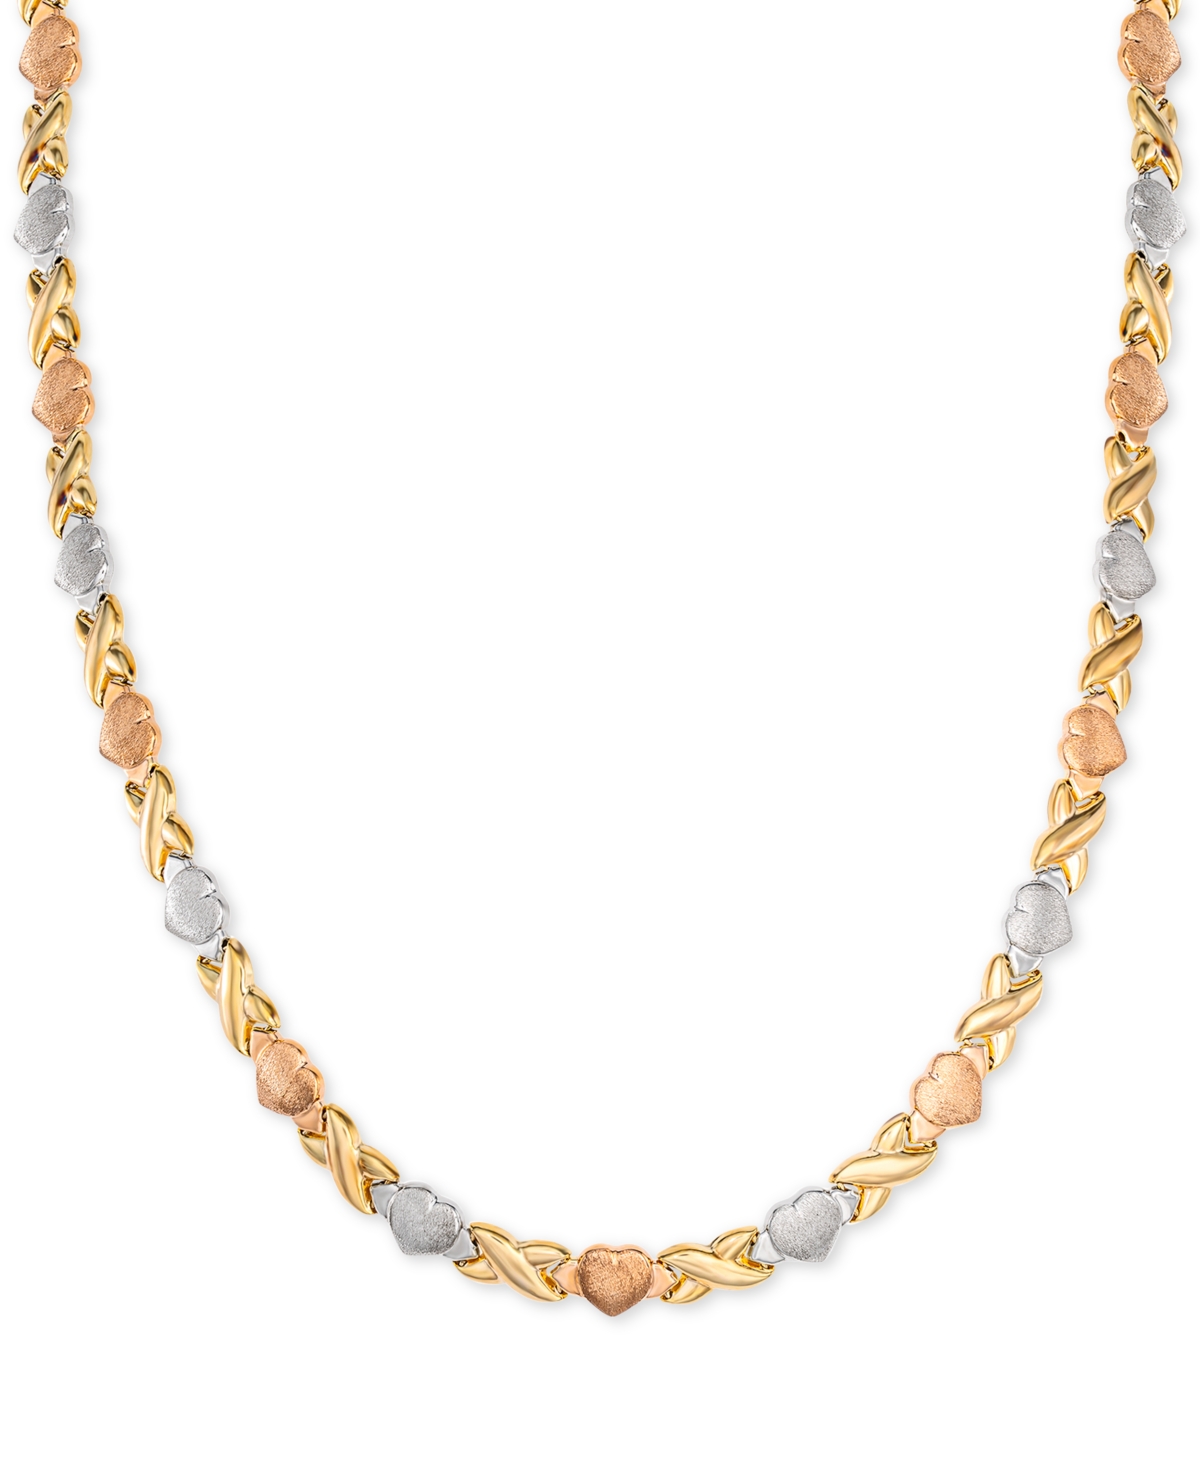 GIANI BERNINI HEARTS & KISSES 17" STATEMENT NECKLACE IN 18K TRICOLOR GOLD-PLATED STERLING SILVER, CREATED FOR MACY